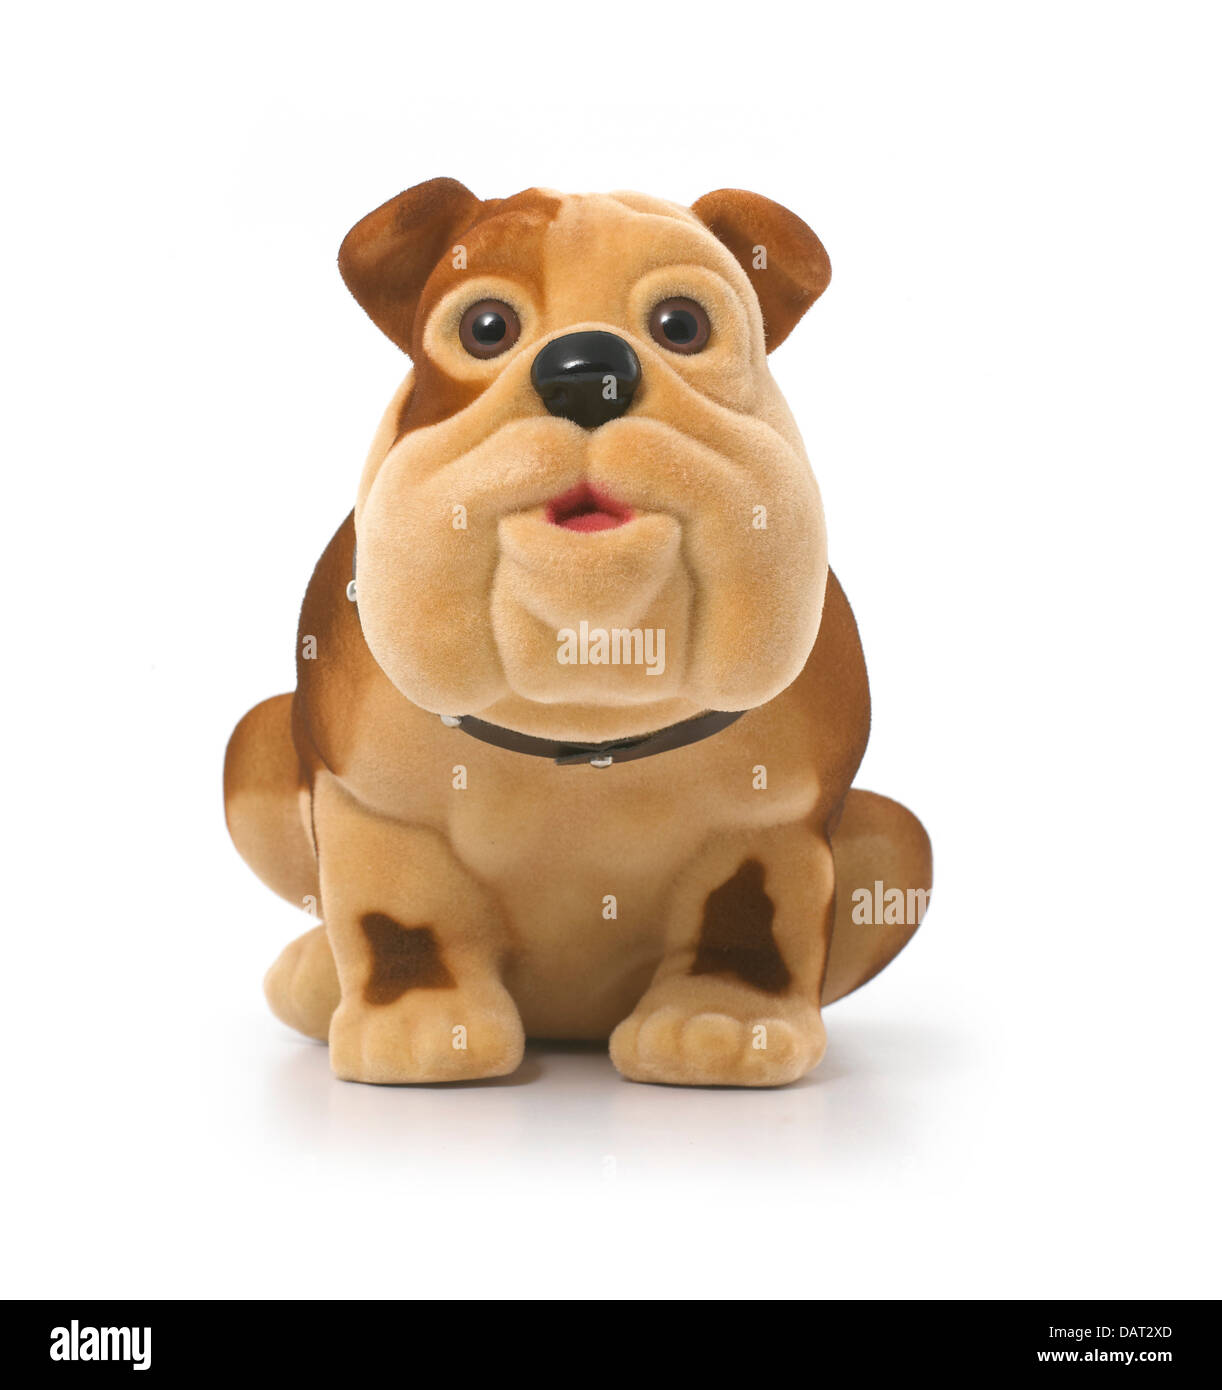 toy dog cut out onto a white background Stock Photo